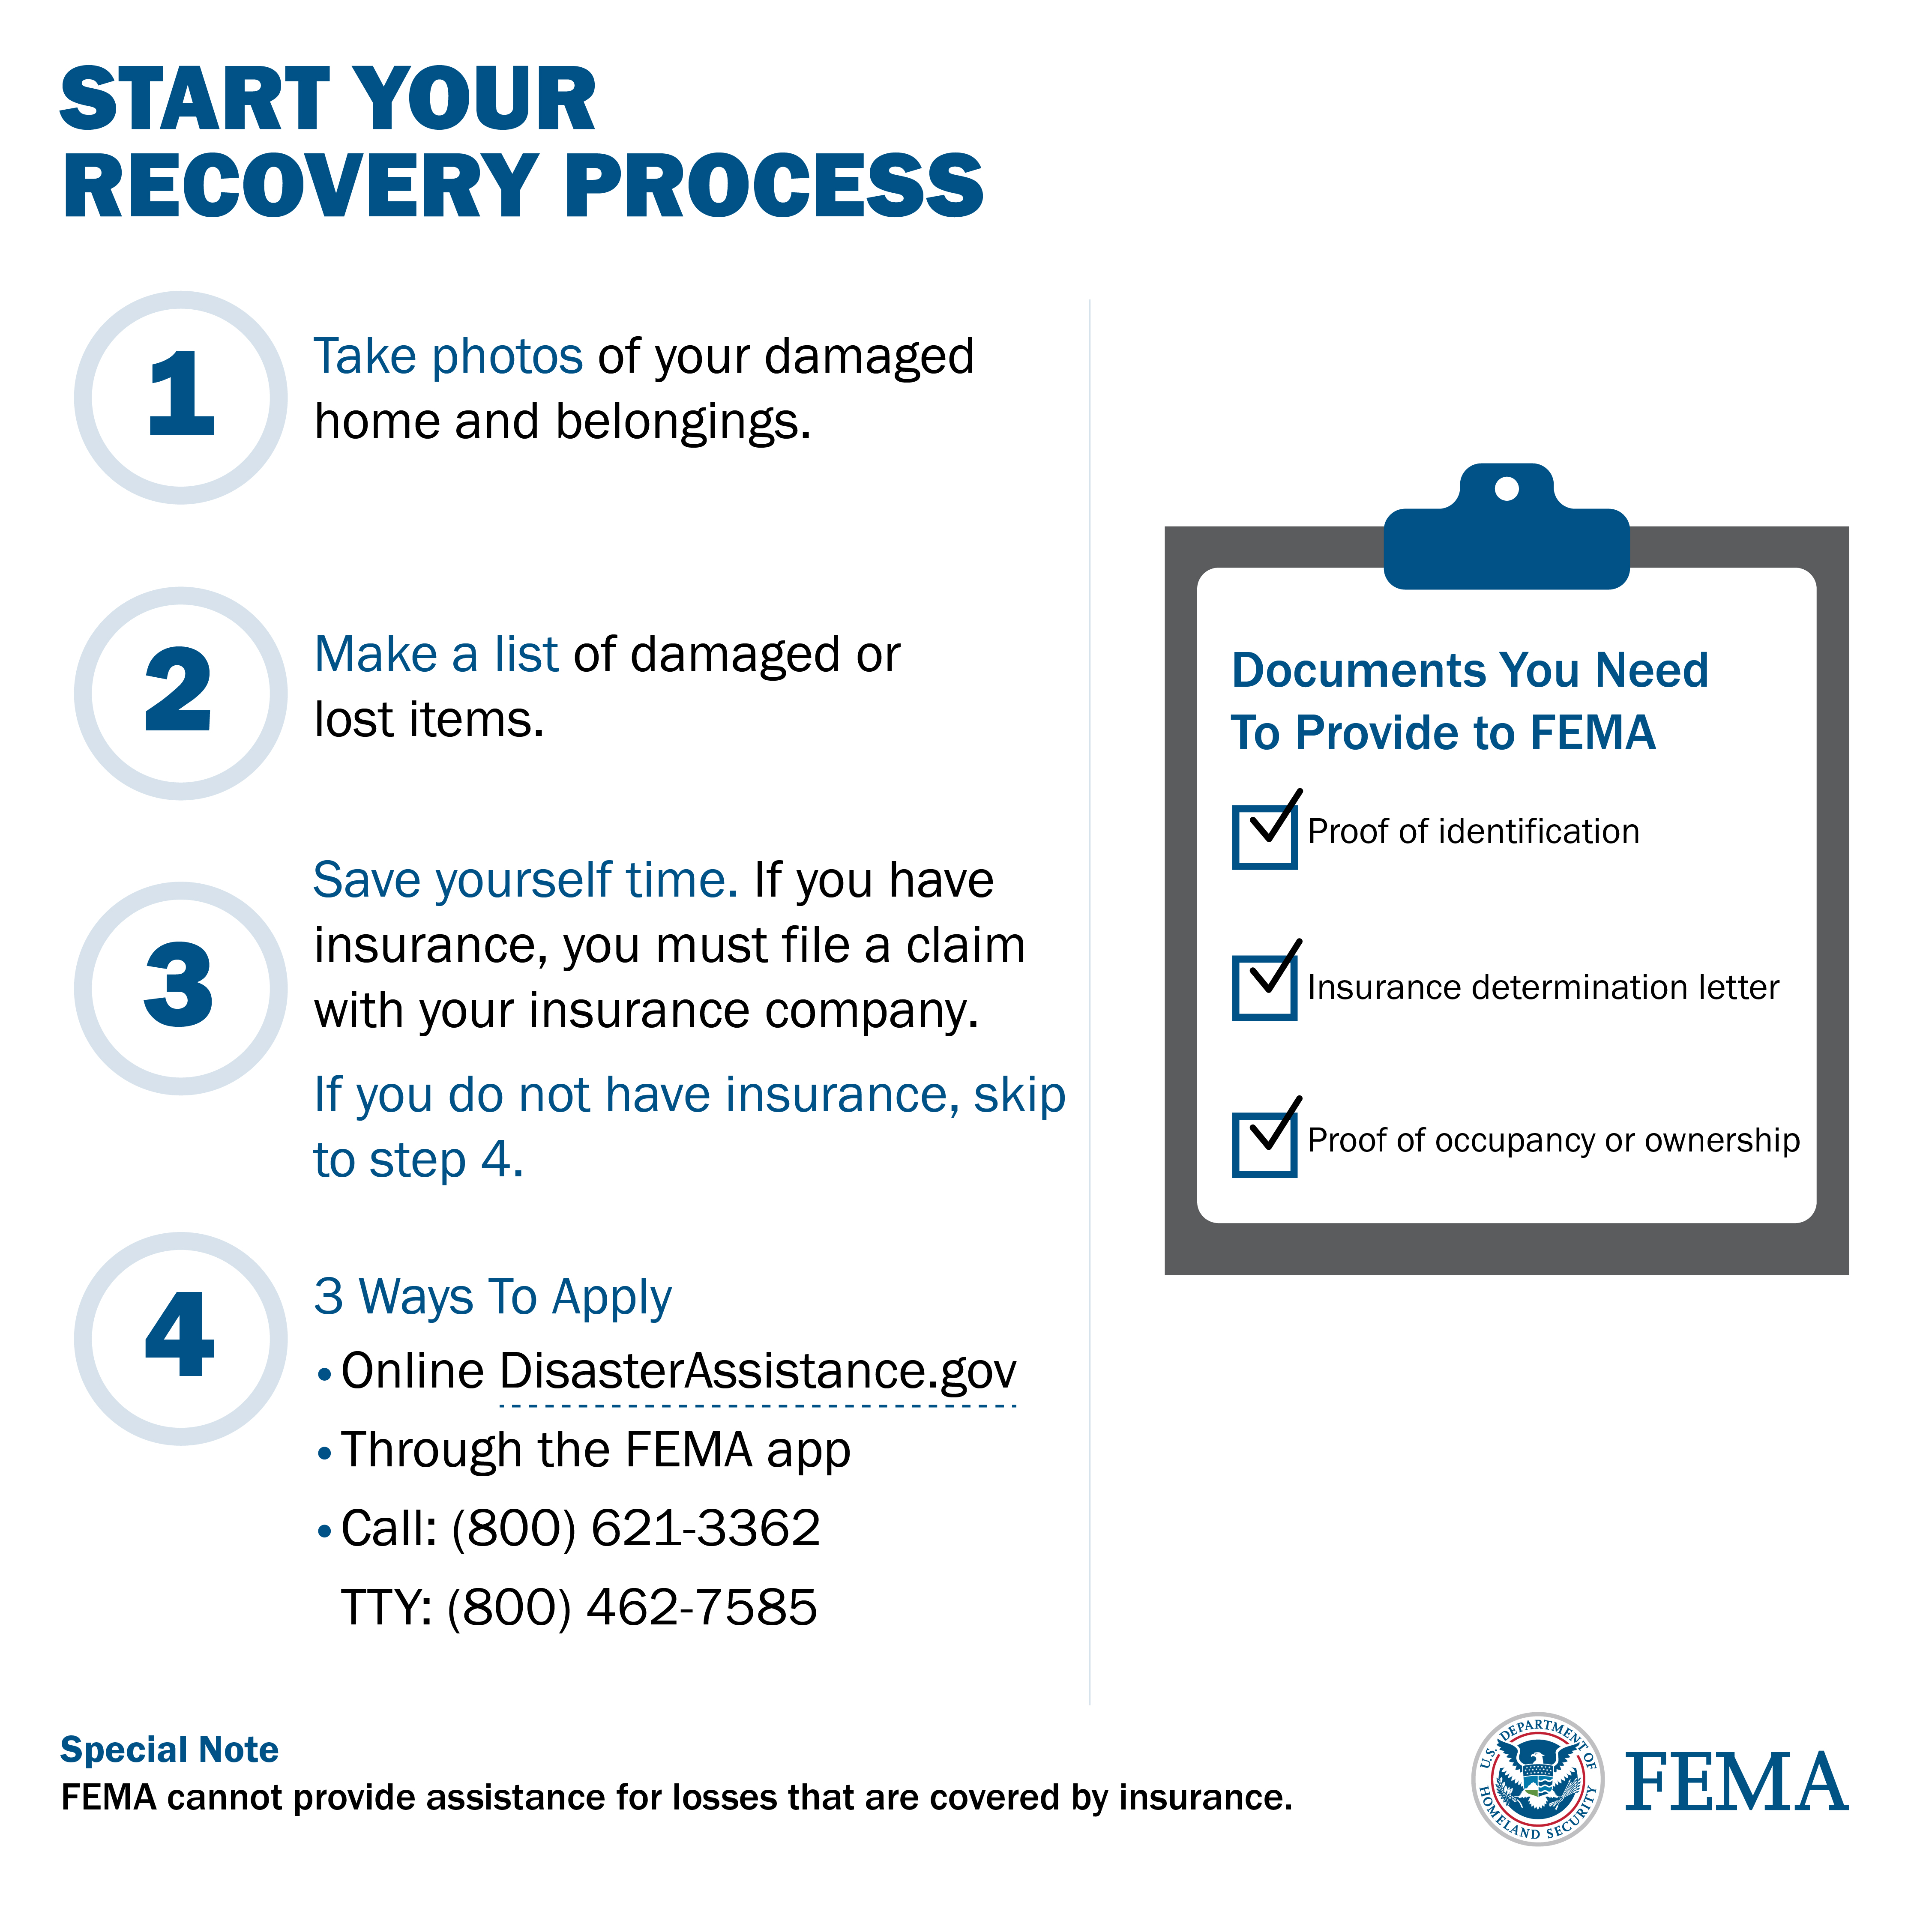 Infographic from FEMA with steps for starting the recovery process.